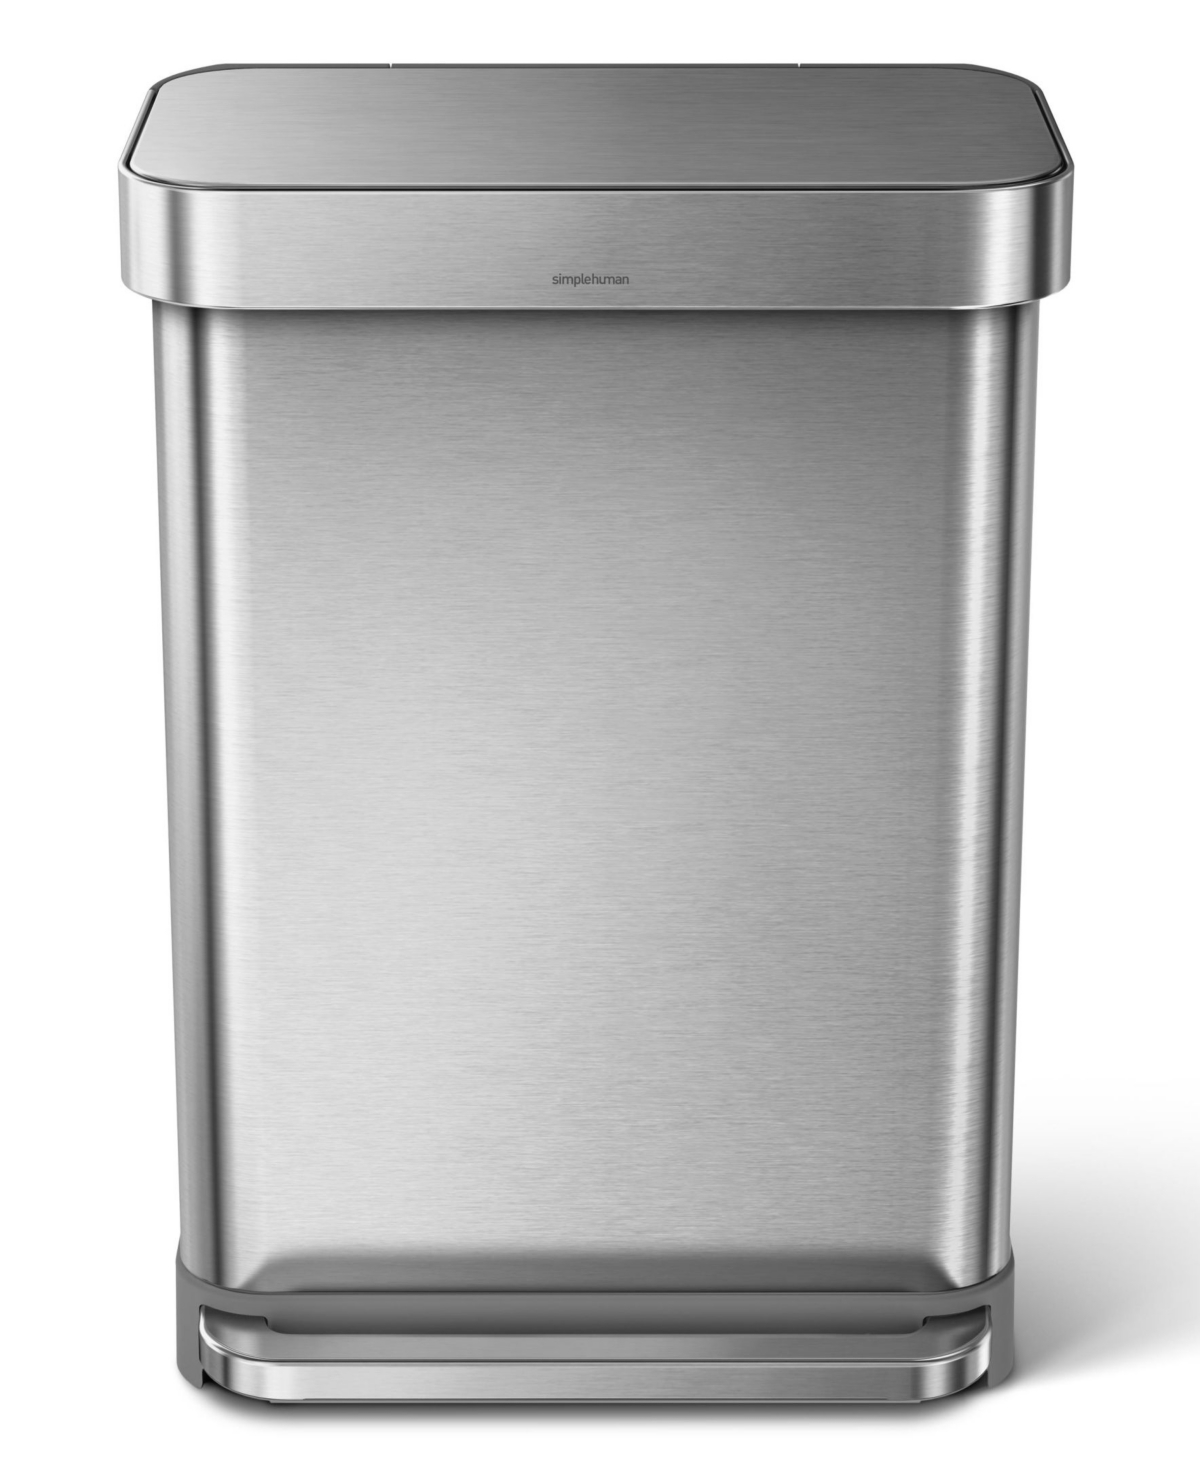 Simplehuman 55l Step Trash Can In No Color